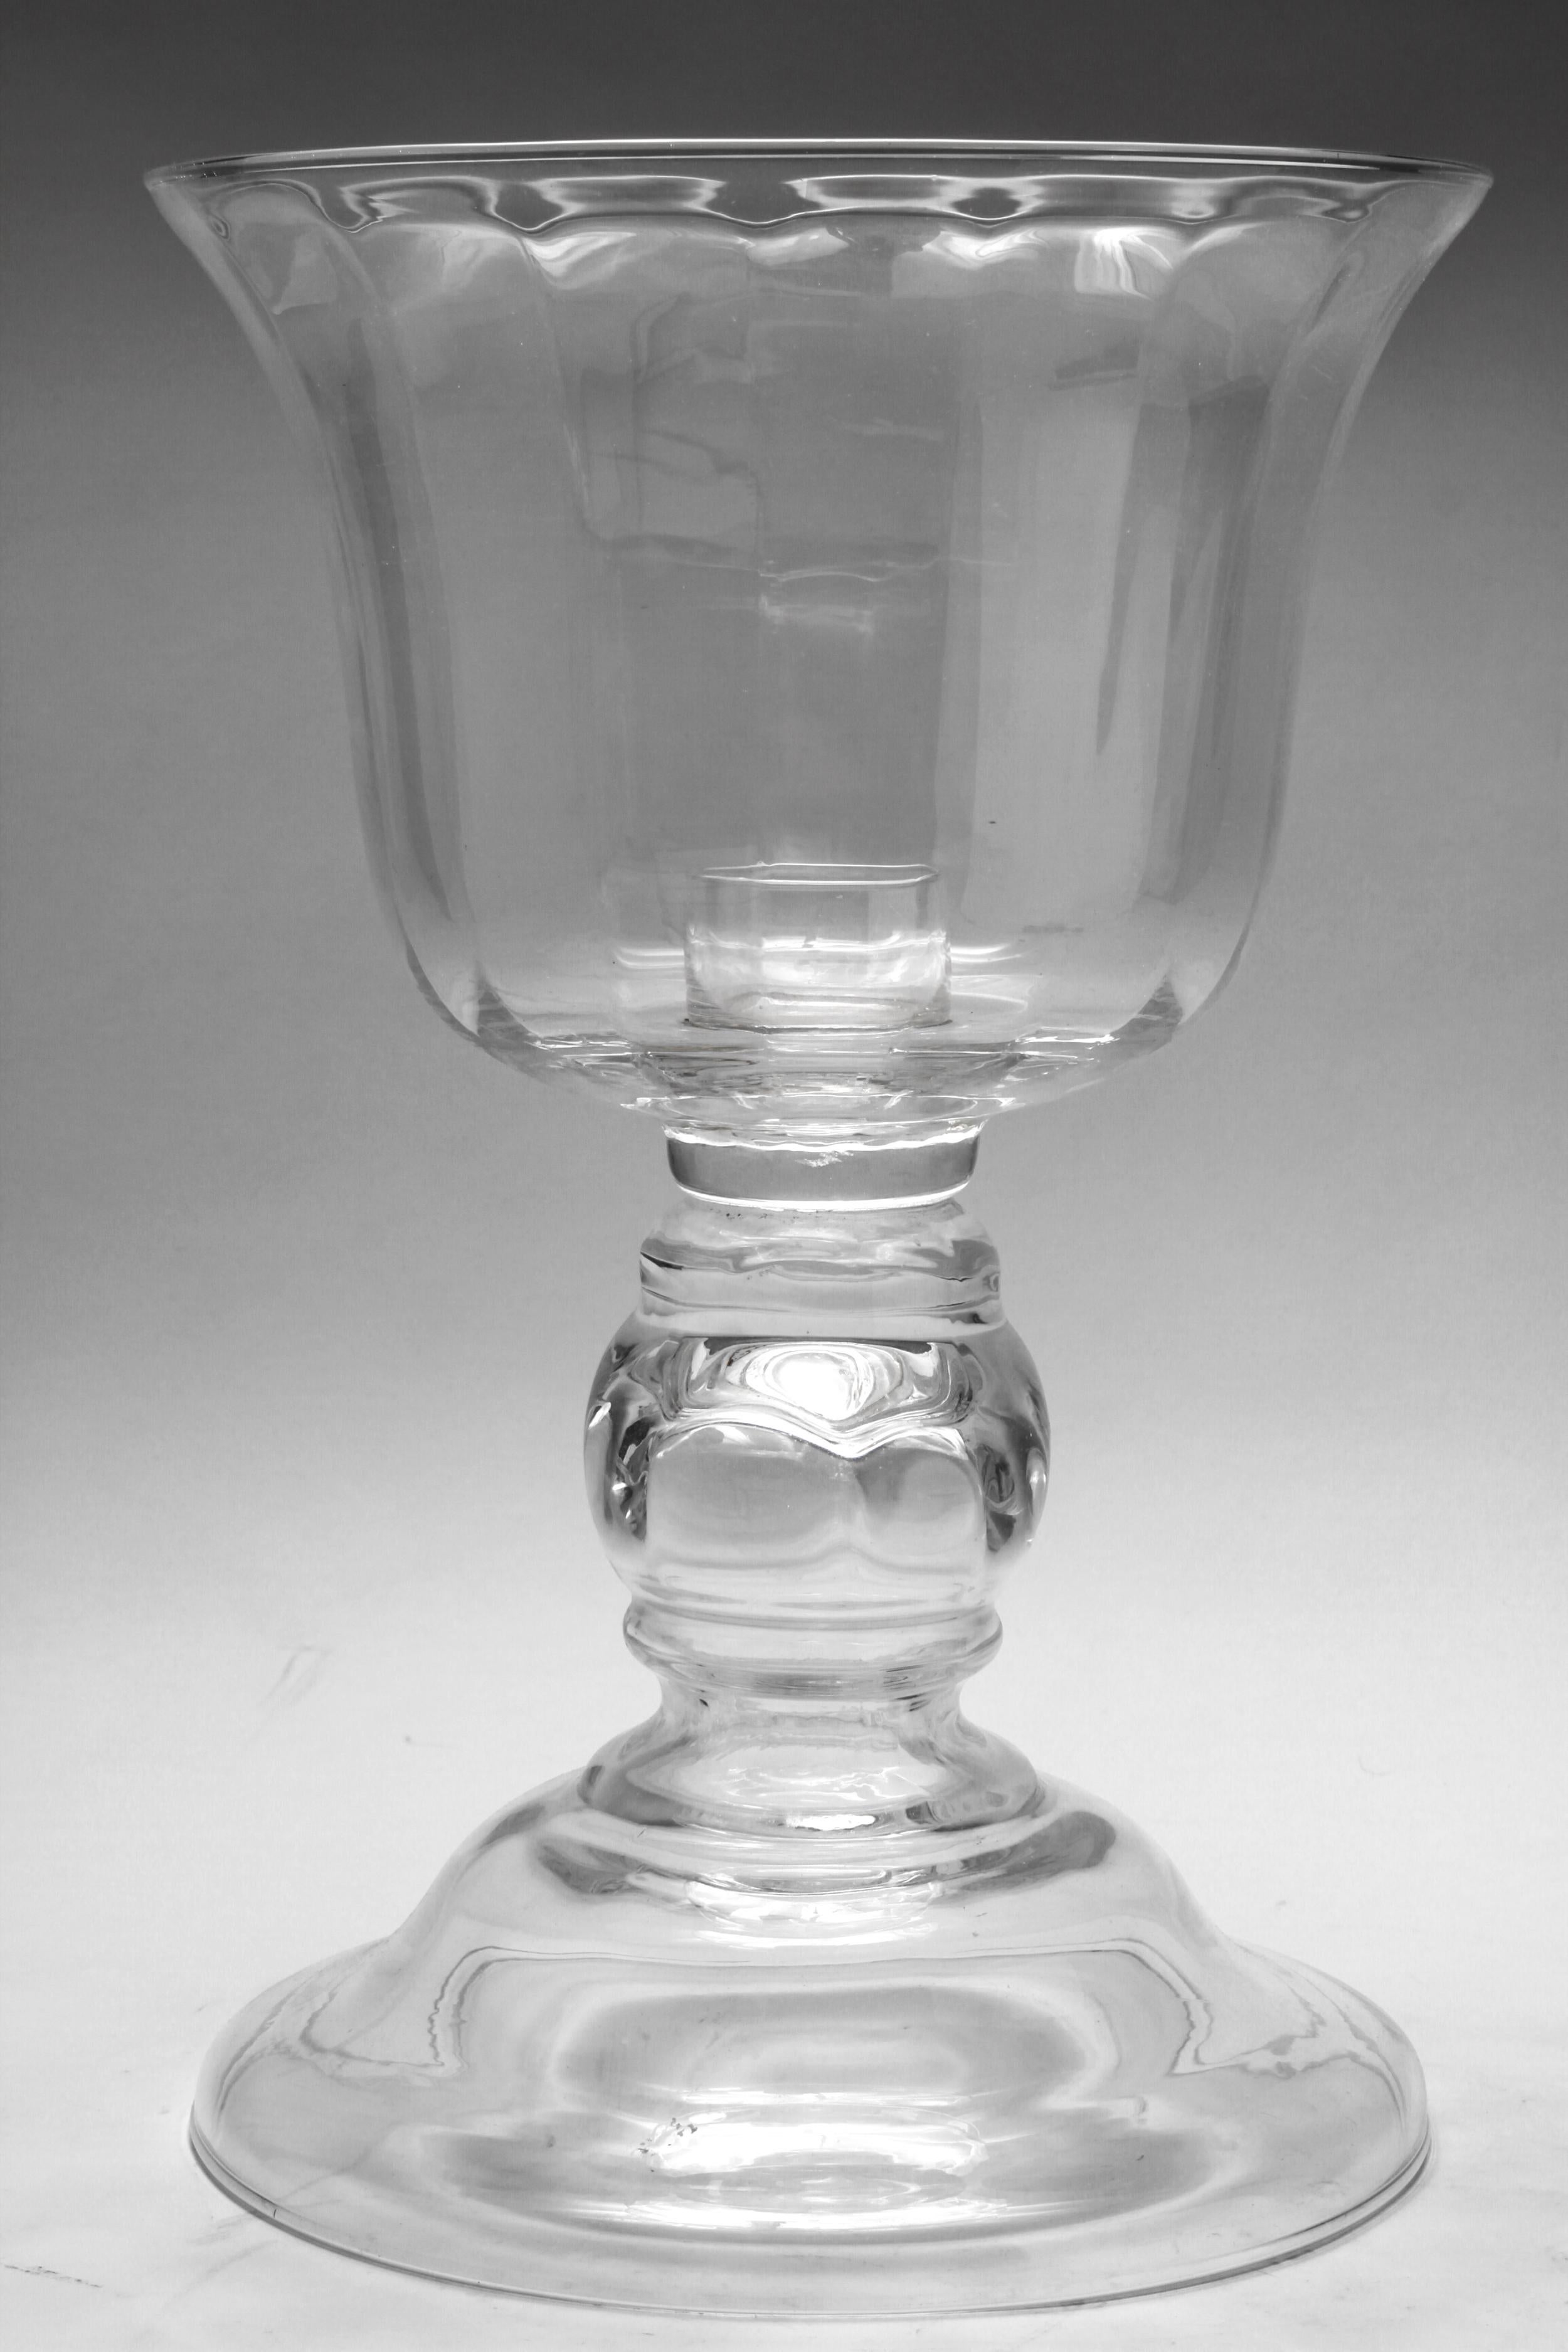 Modern colorless glass compote or candleholder, with a flared rim bowl, turned over a round base. The piece is in great vintage condition with age-appropriate wear to the bottom.